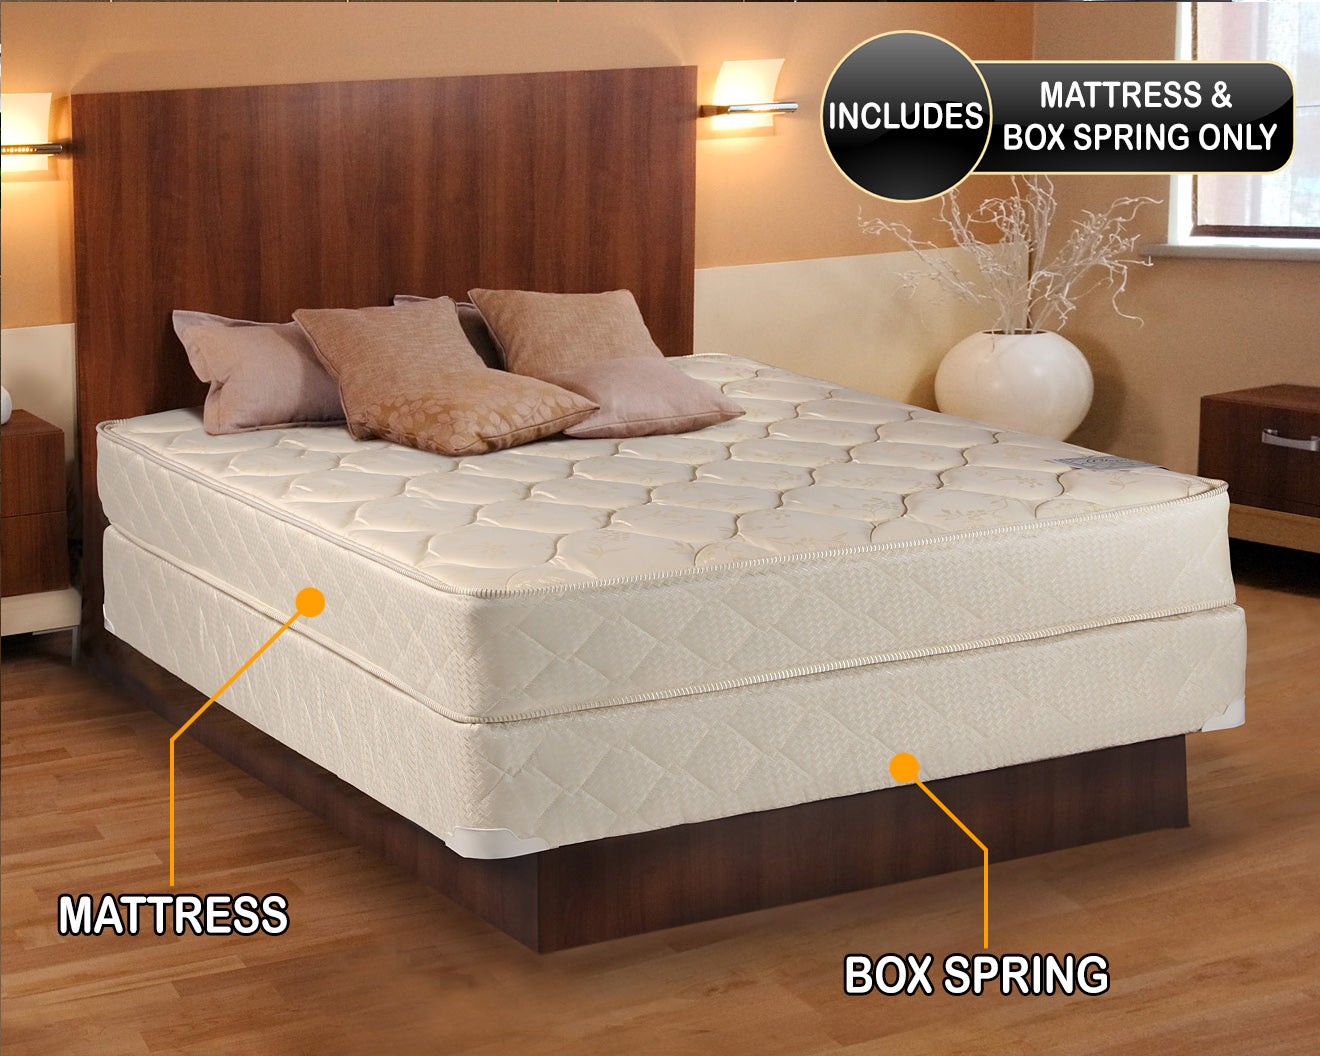 Comfort Classic Gentle Firm California King Size Mattress and Box Spring Set - Fully Assembled, Orthopedic, Good for Your Back - Long Lasting and 1 Sided